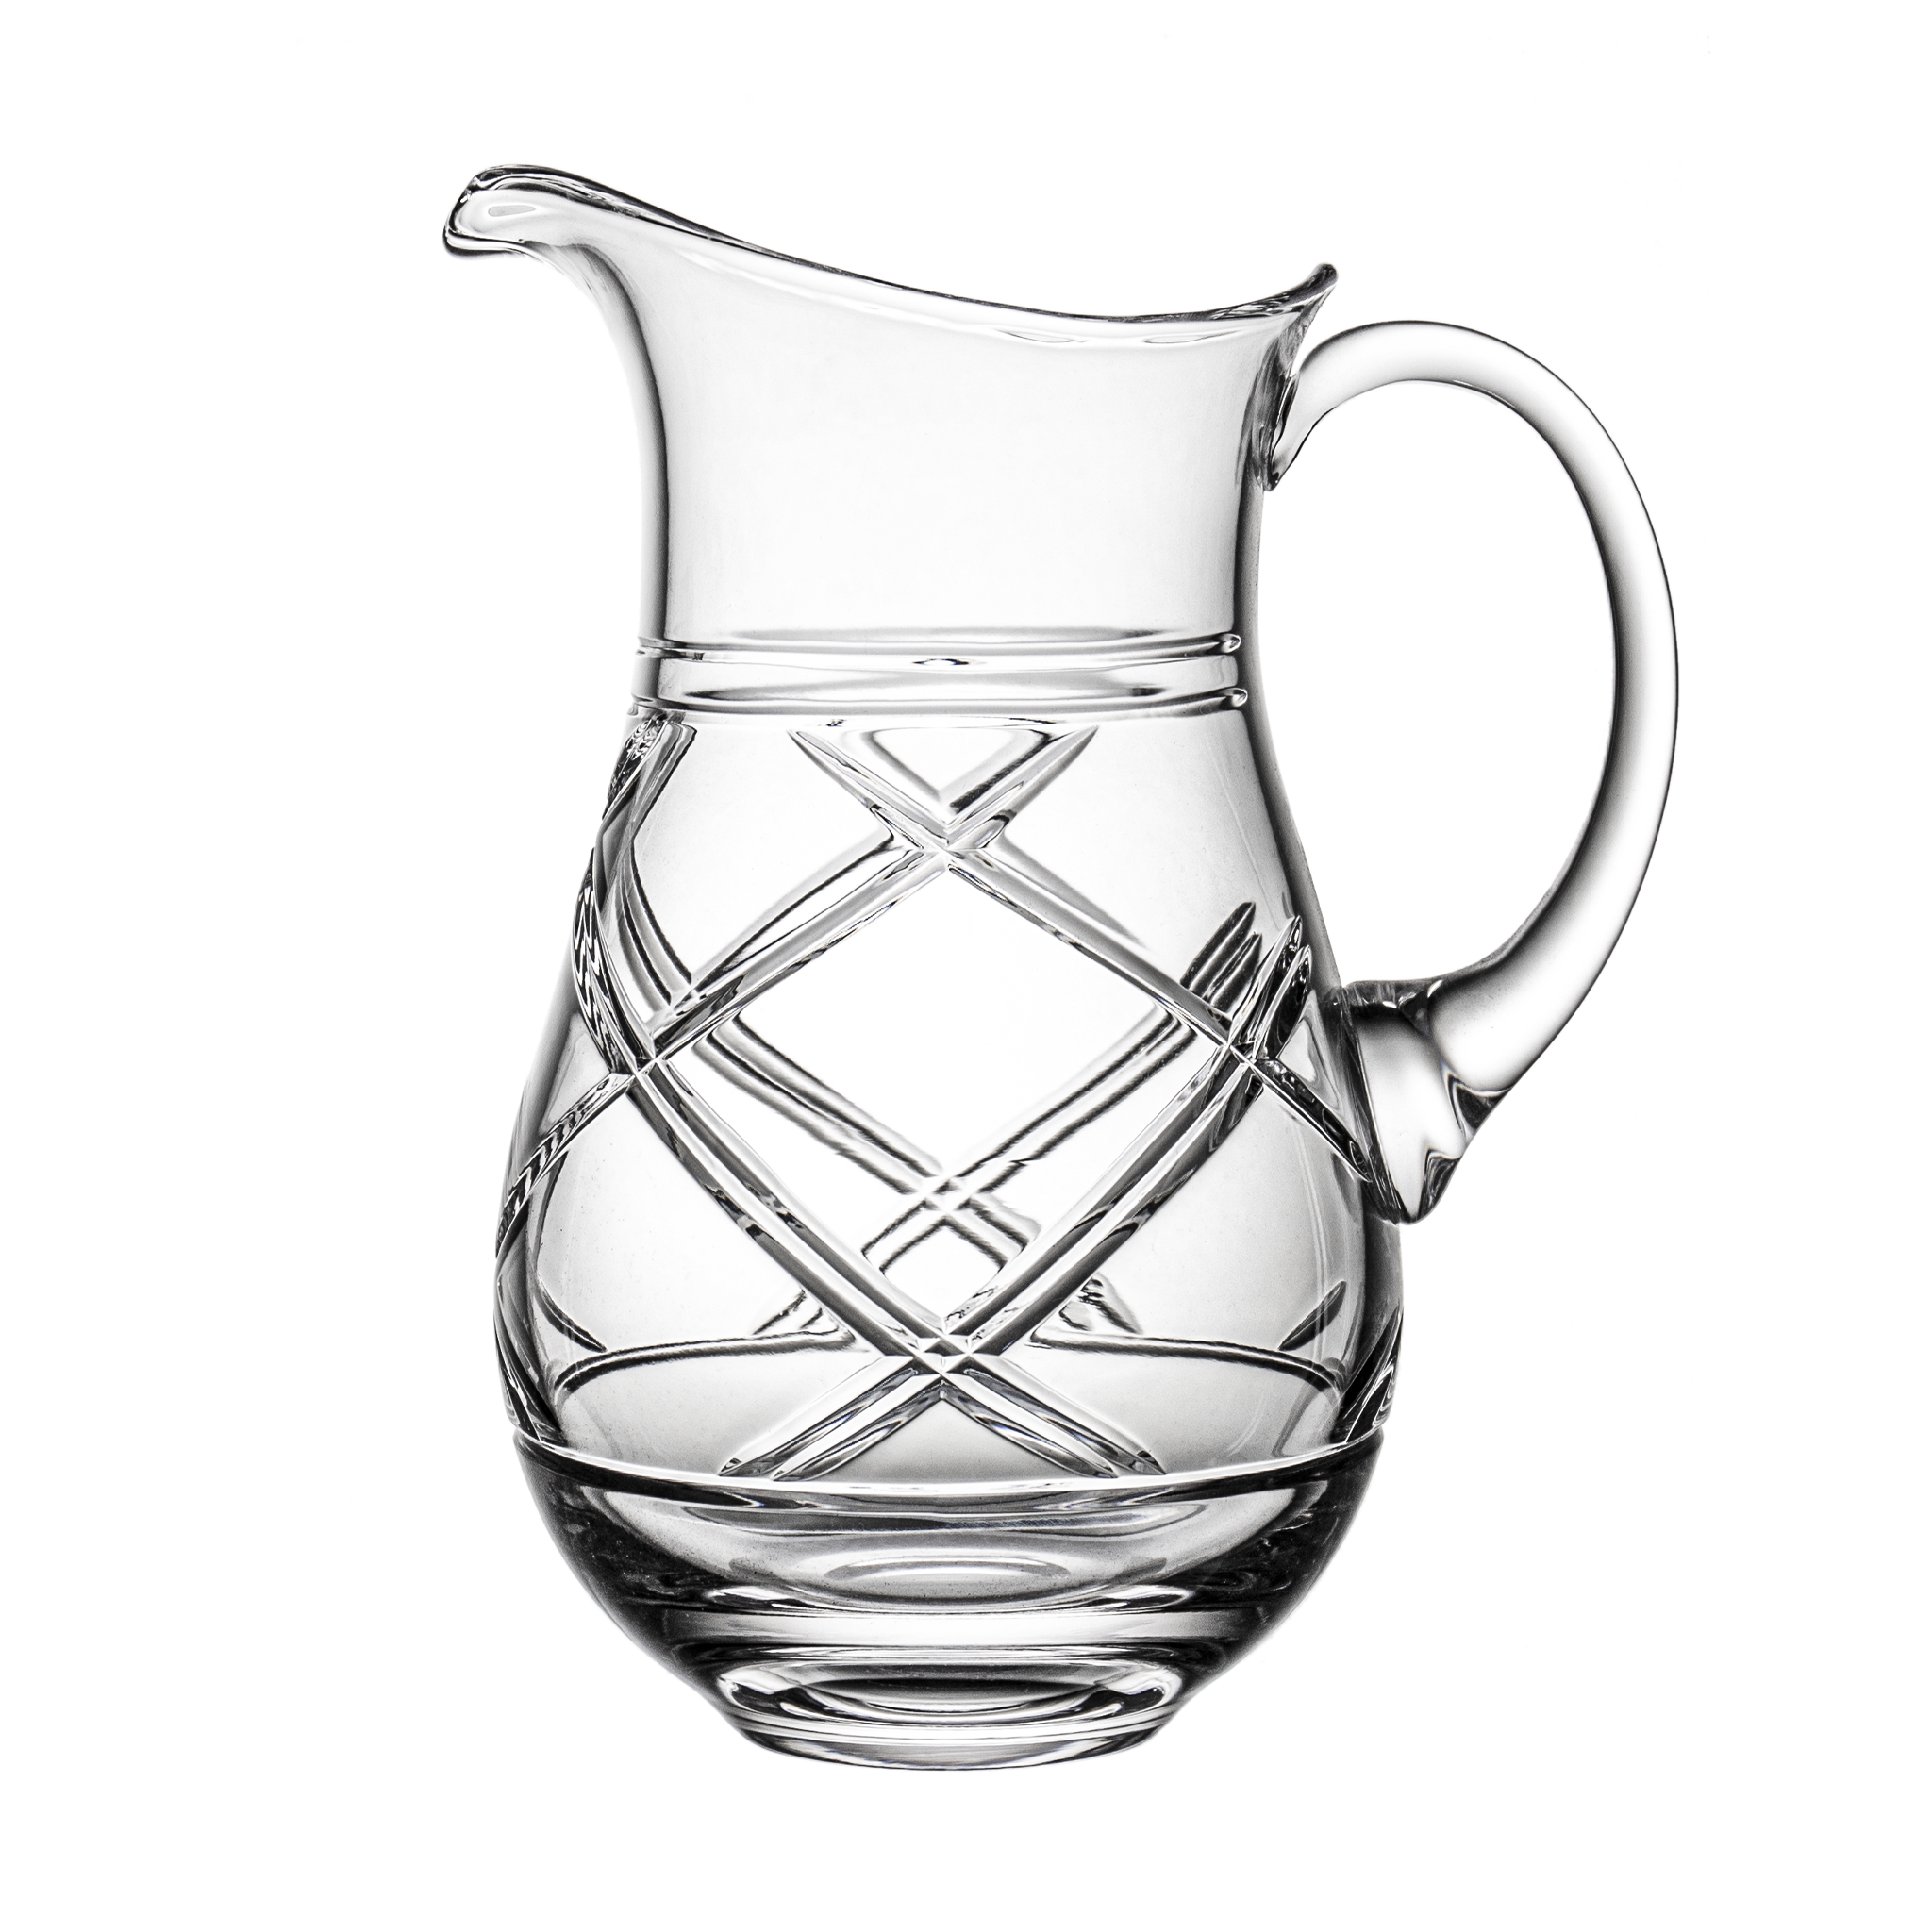 Small Pitcher With Lid 